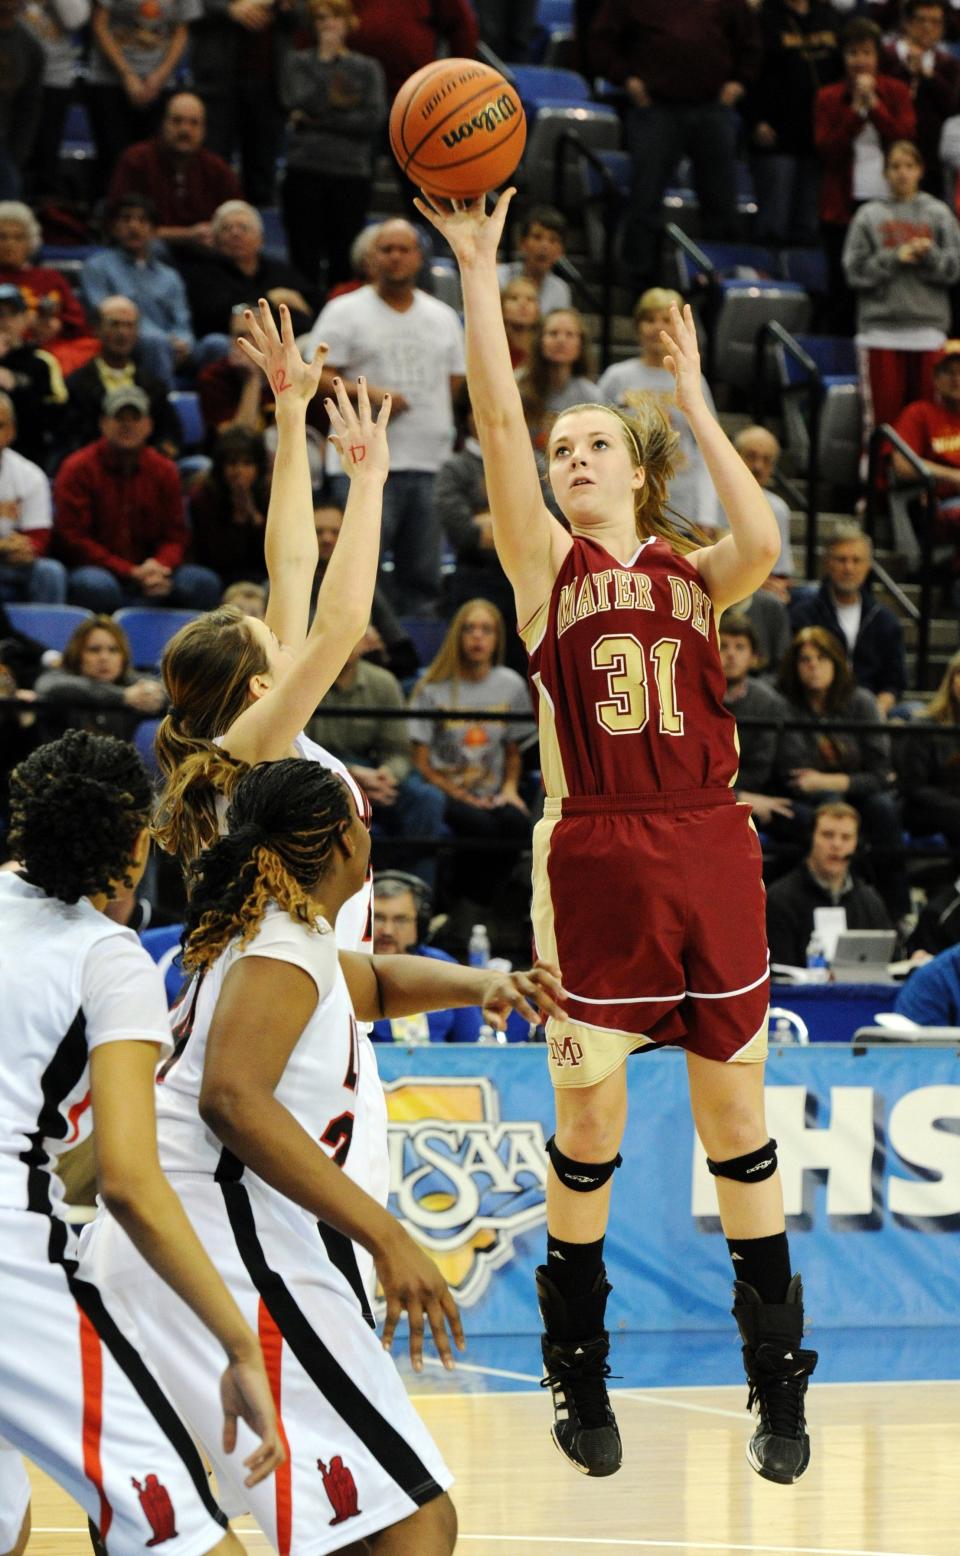 Mater Dei's Maura Muensterman puts up the game winning shot in overtime against Fort Wayne Bishop Luer in the 2A girls' state championship basketball game at the Hulman Center in Terre Haute, Ind., on Saturday, March 3, 2012